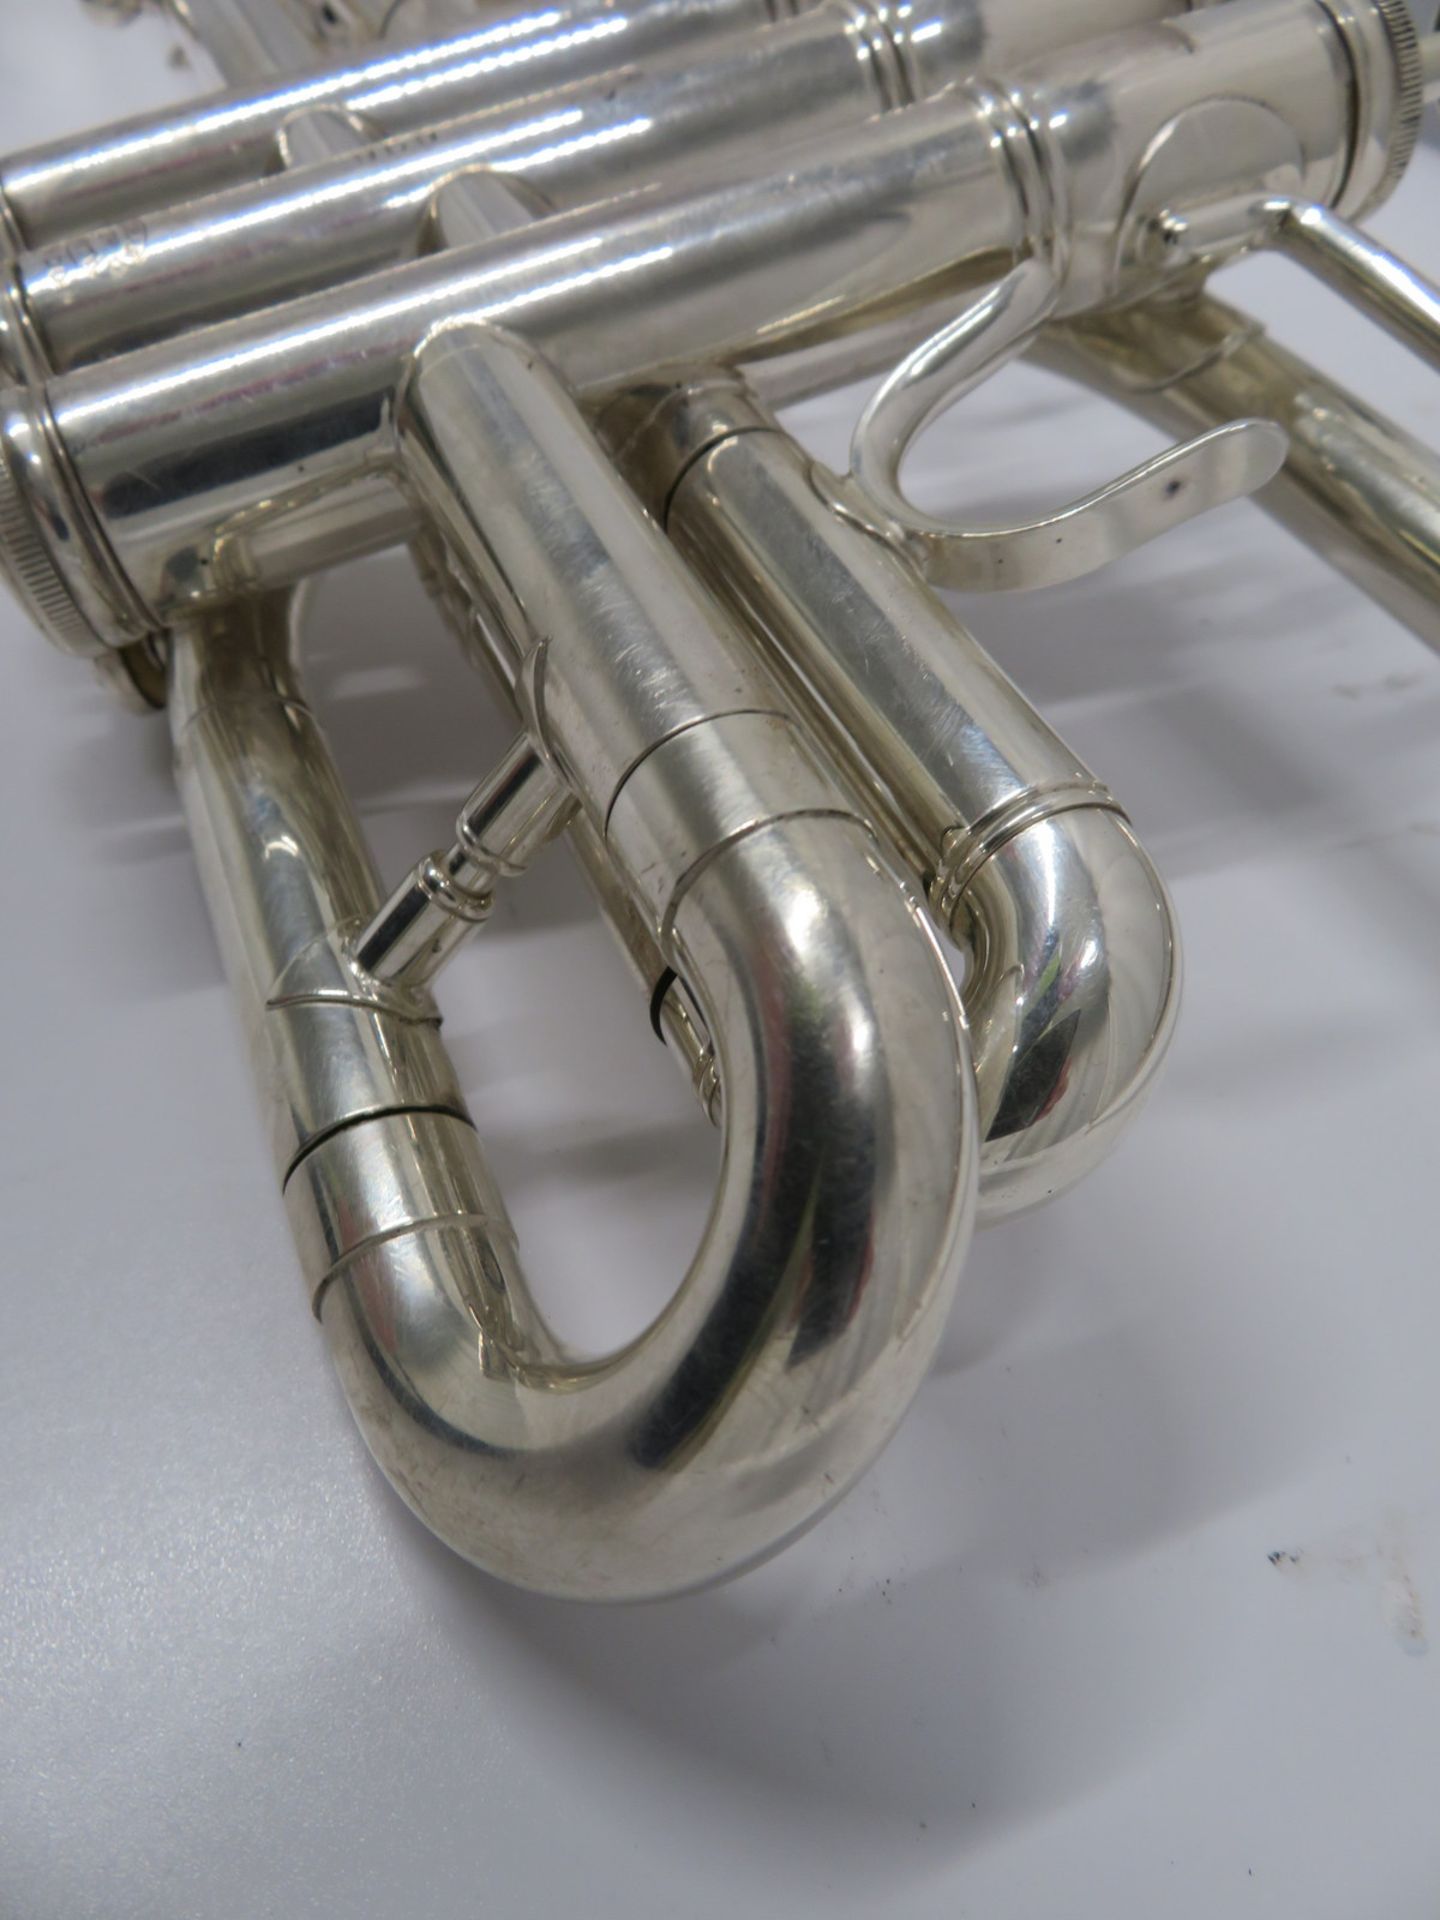 Smith-Watkins fanfare trumpet with case. Serial number: 696. - Image 8 of 15